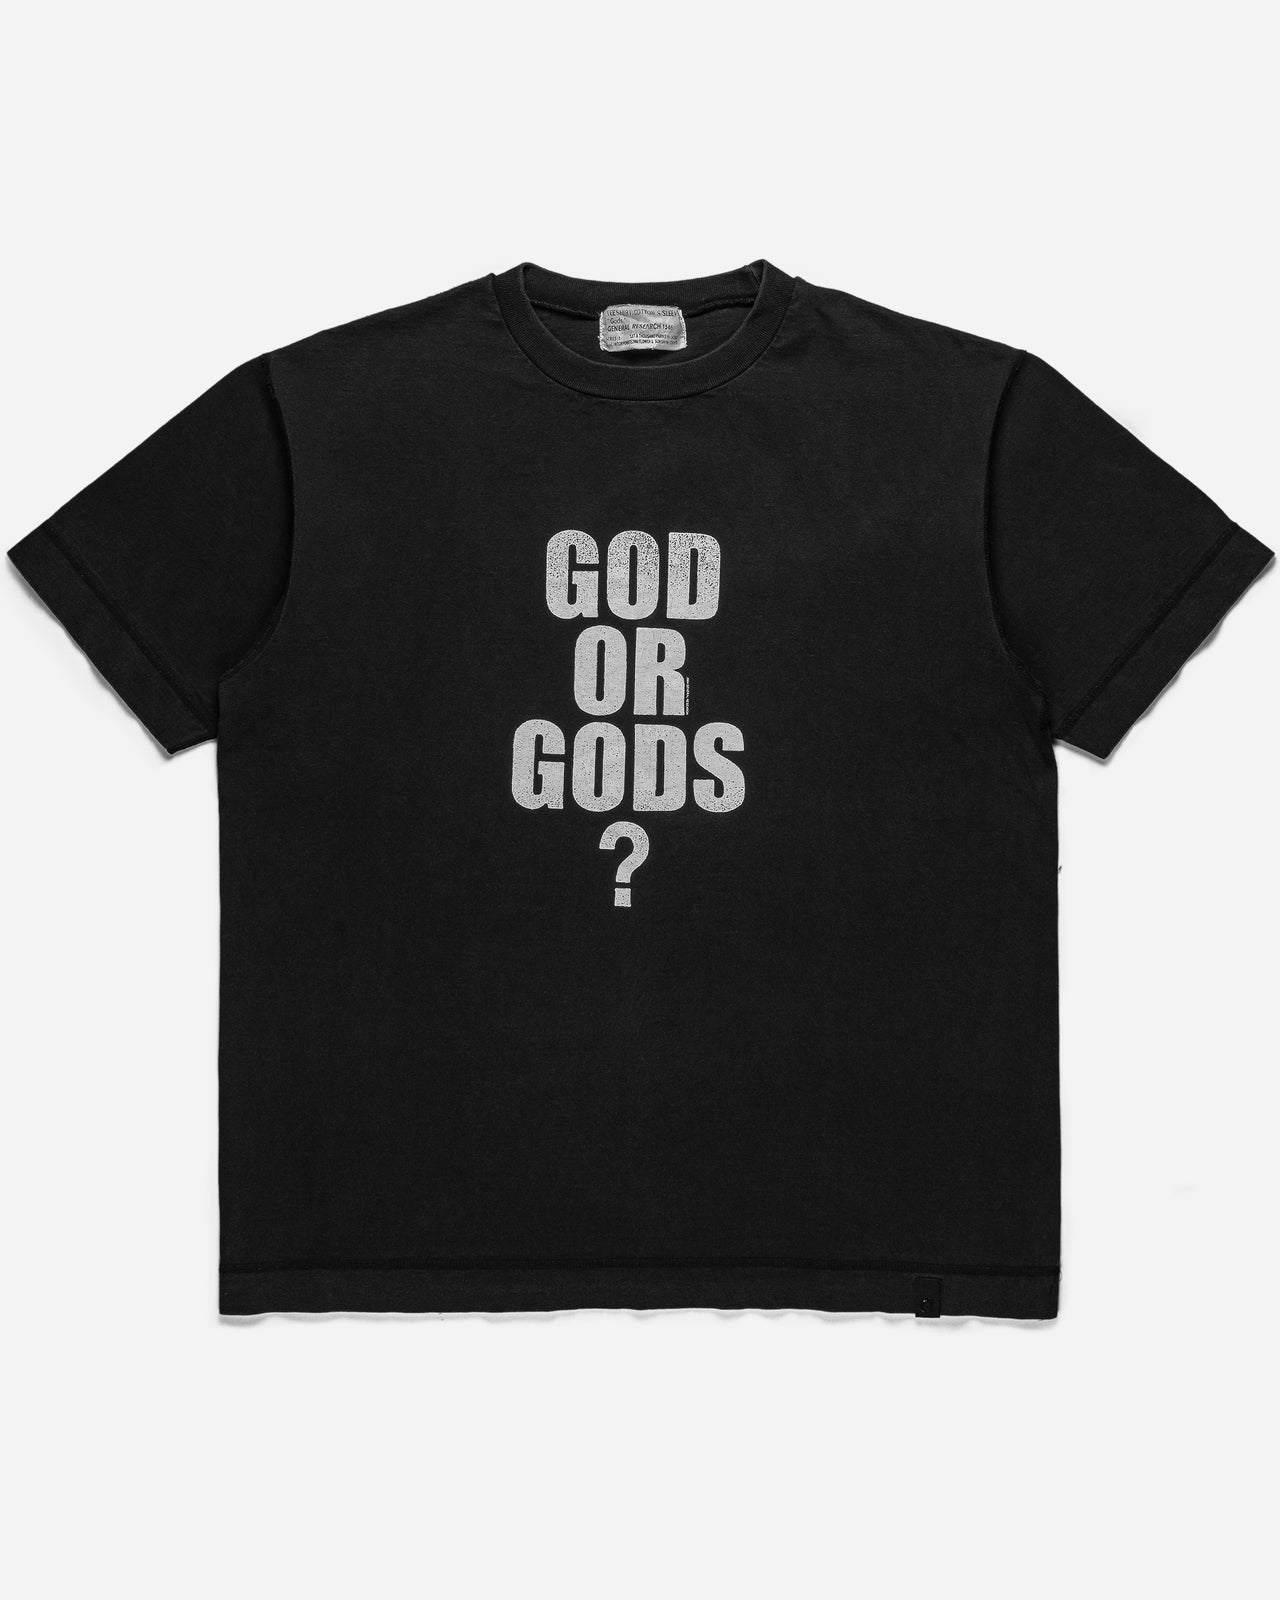 General Research "God Or Gods?" Tee - SS04